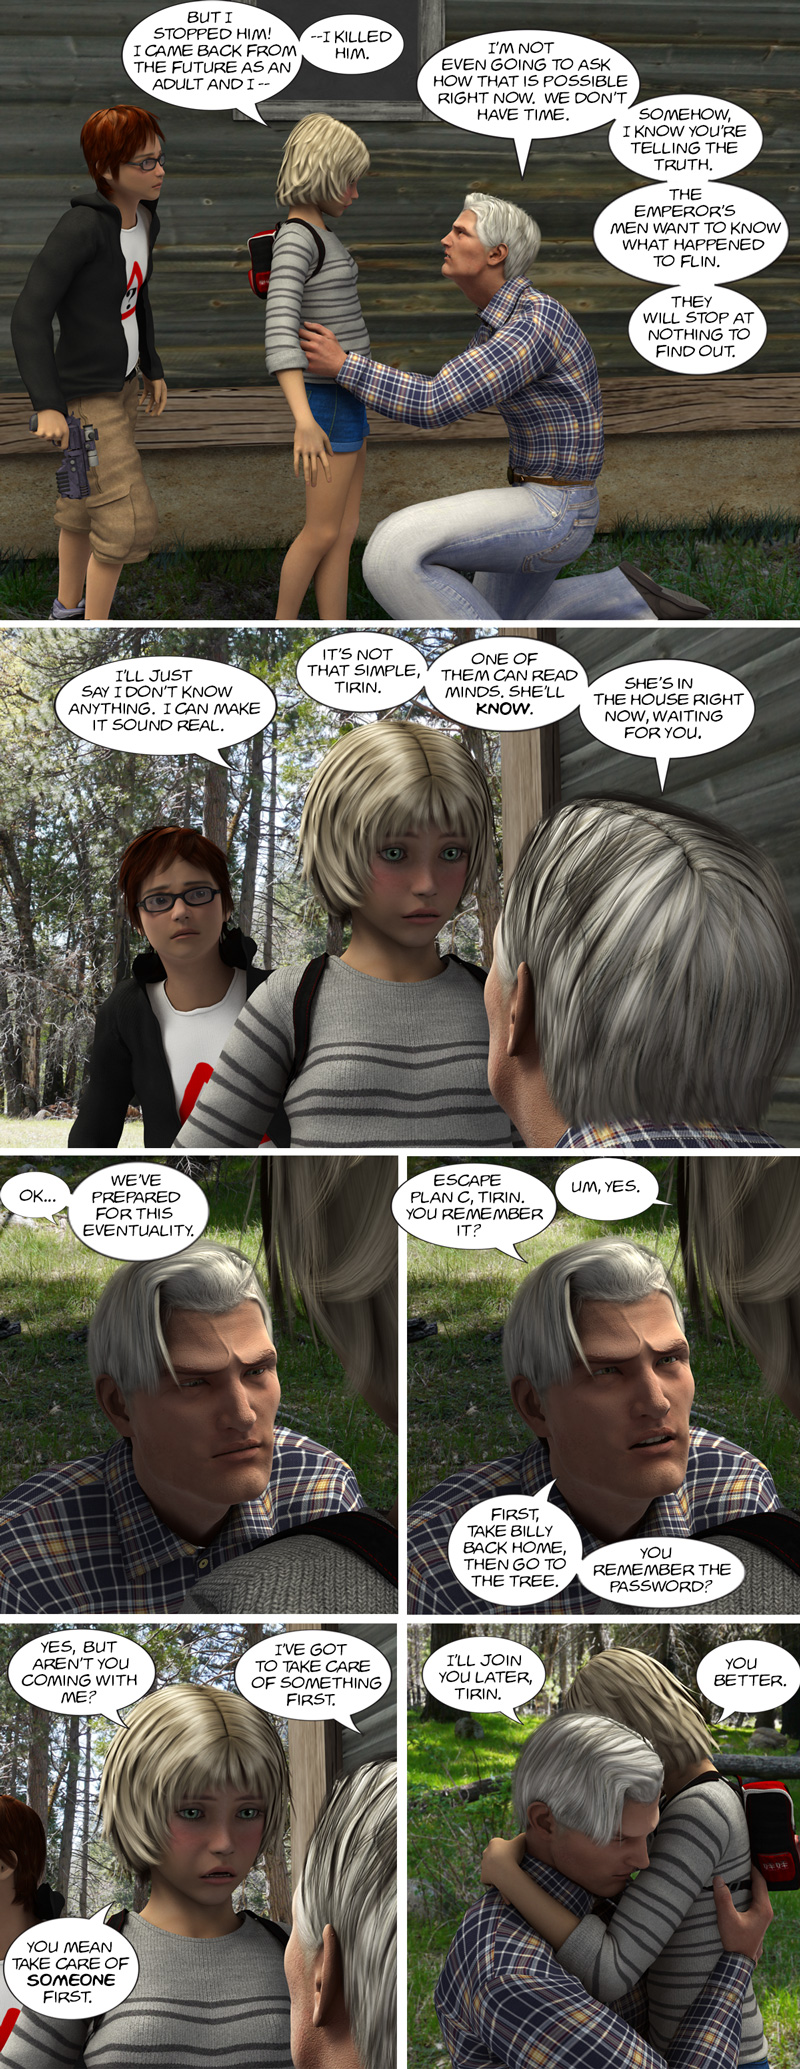 Chapter 11, page 27